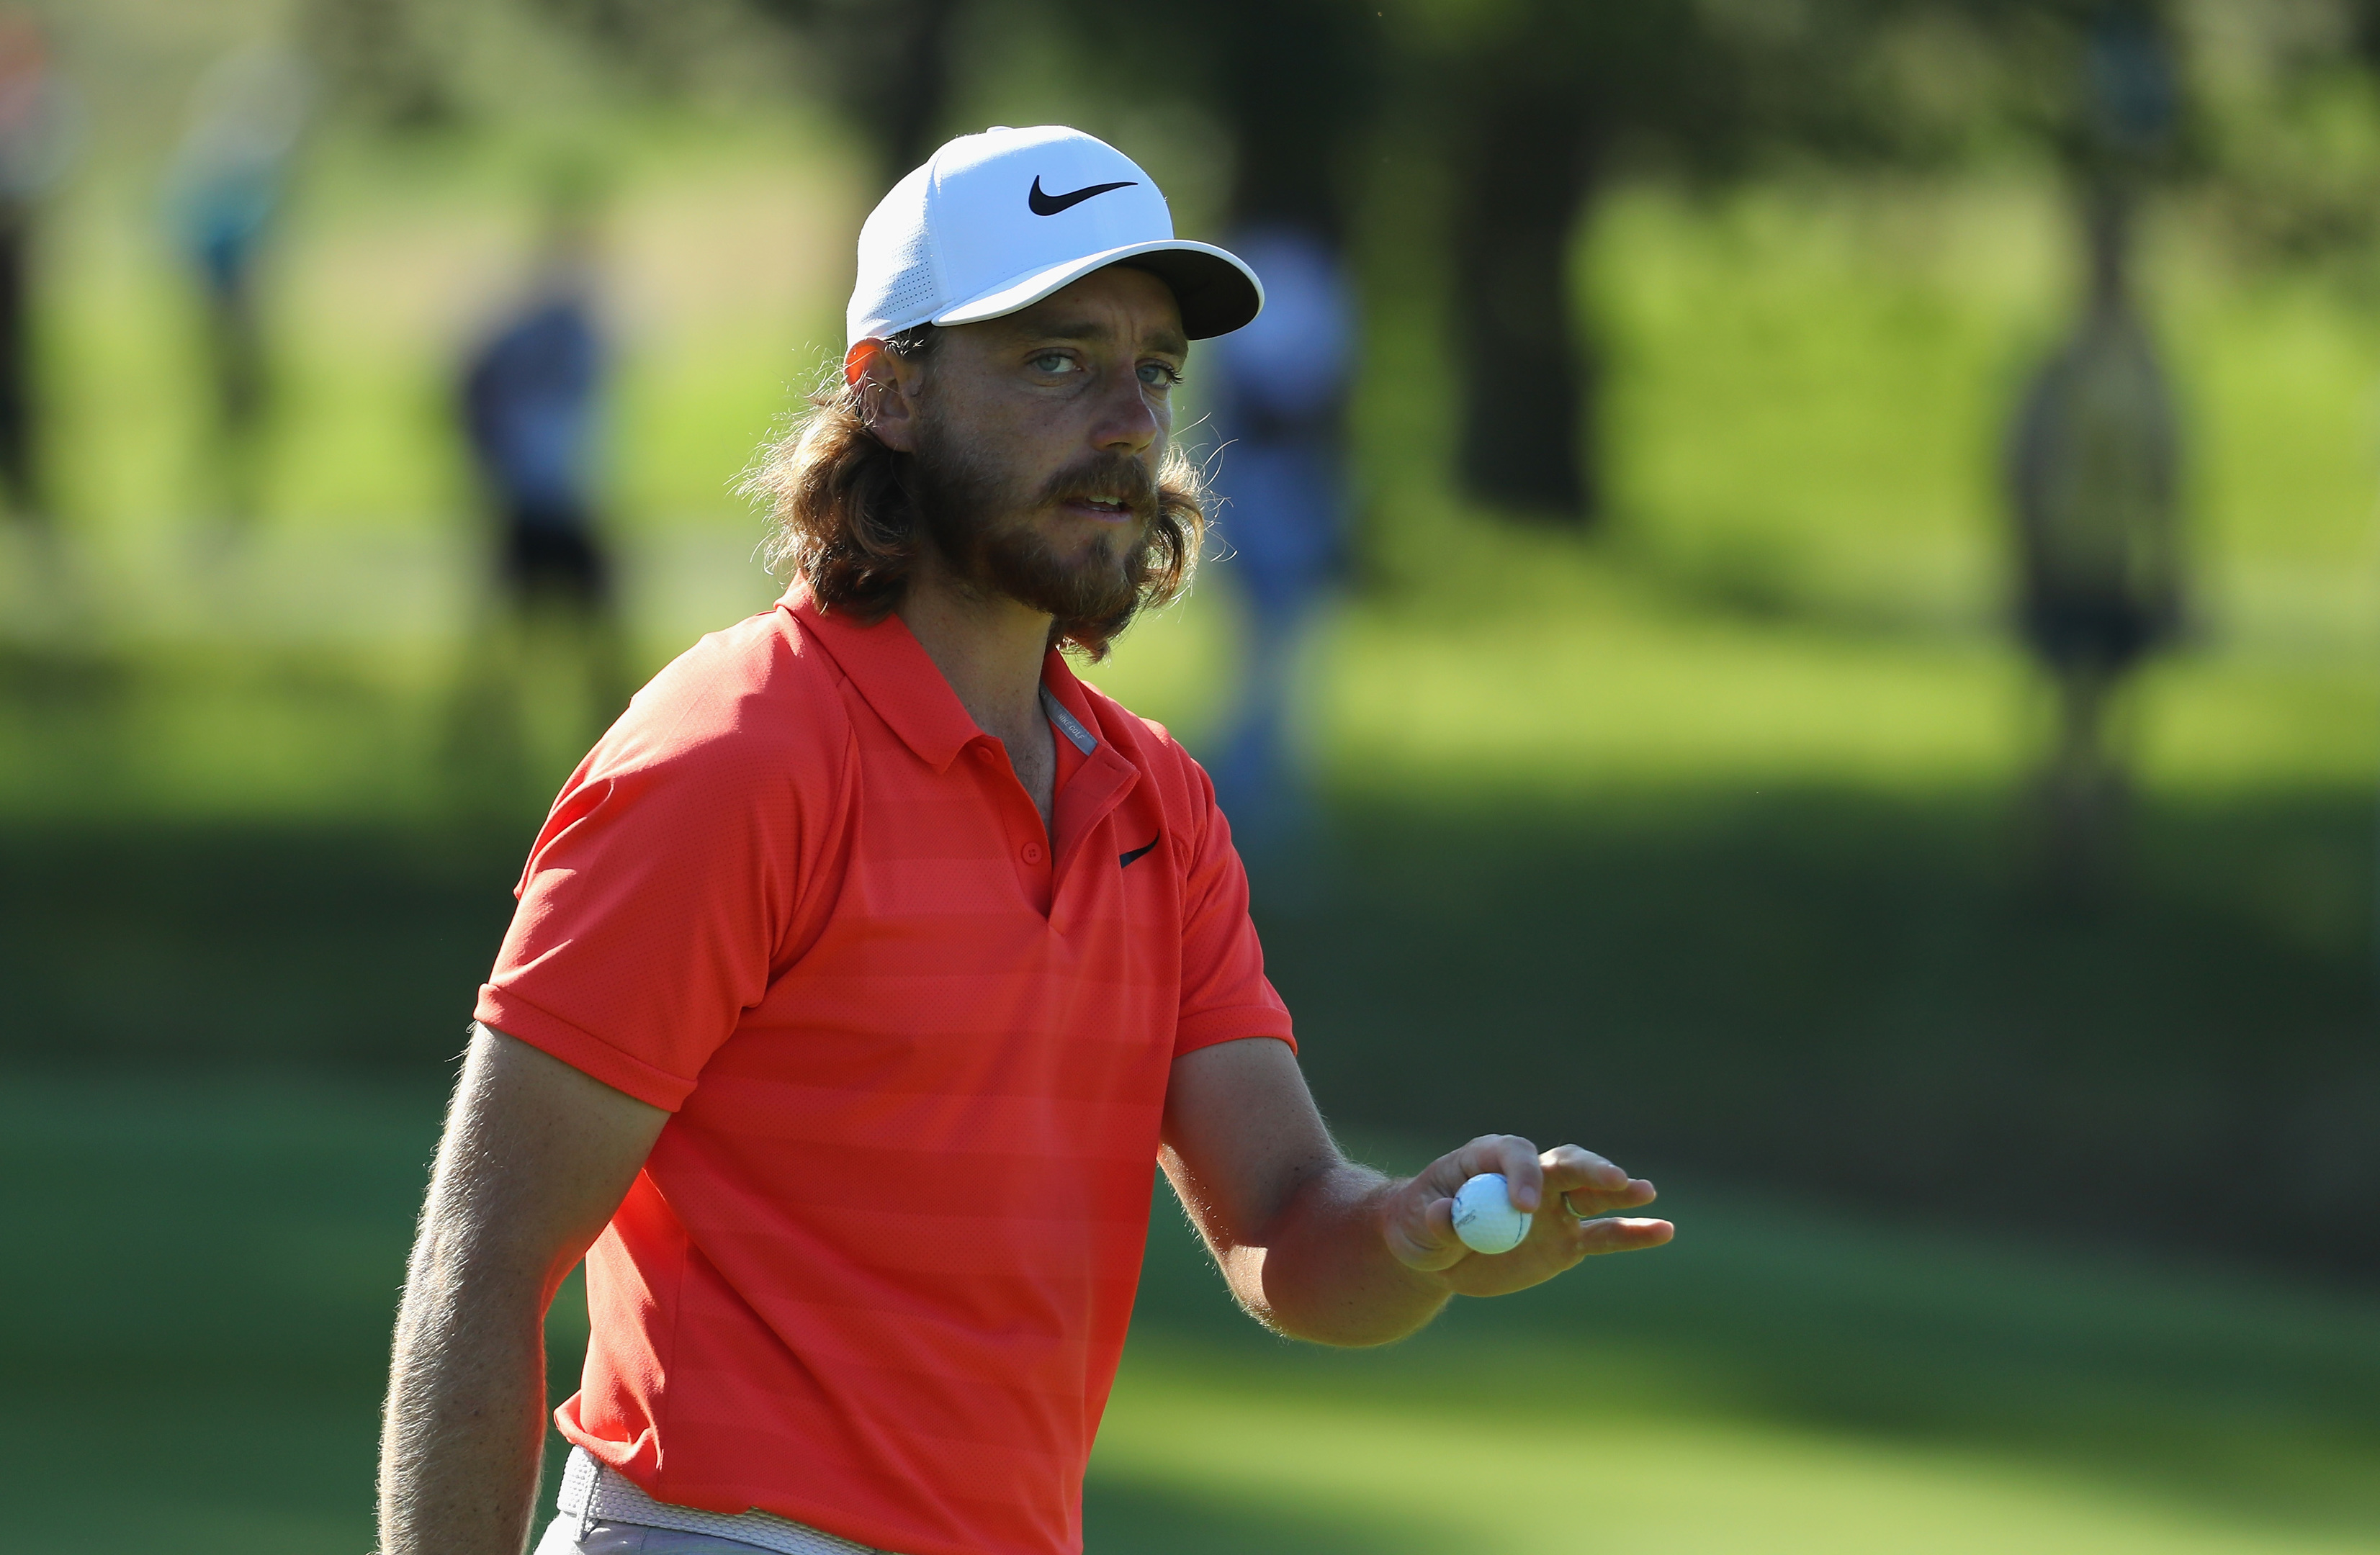 Tommy Fleetwood has pulled out of the Scottish Open to tay fresh for his Open Championship challenge.